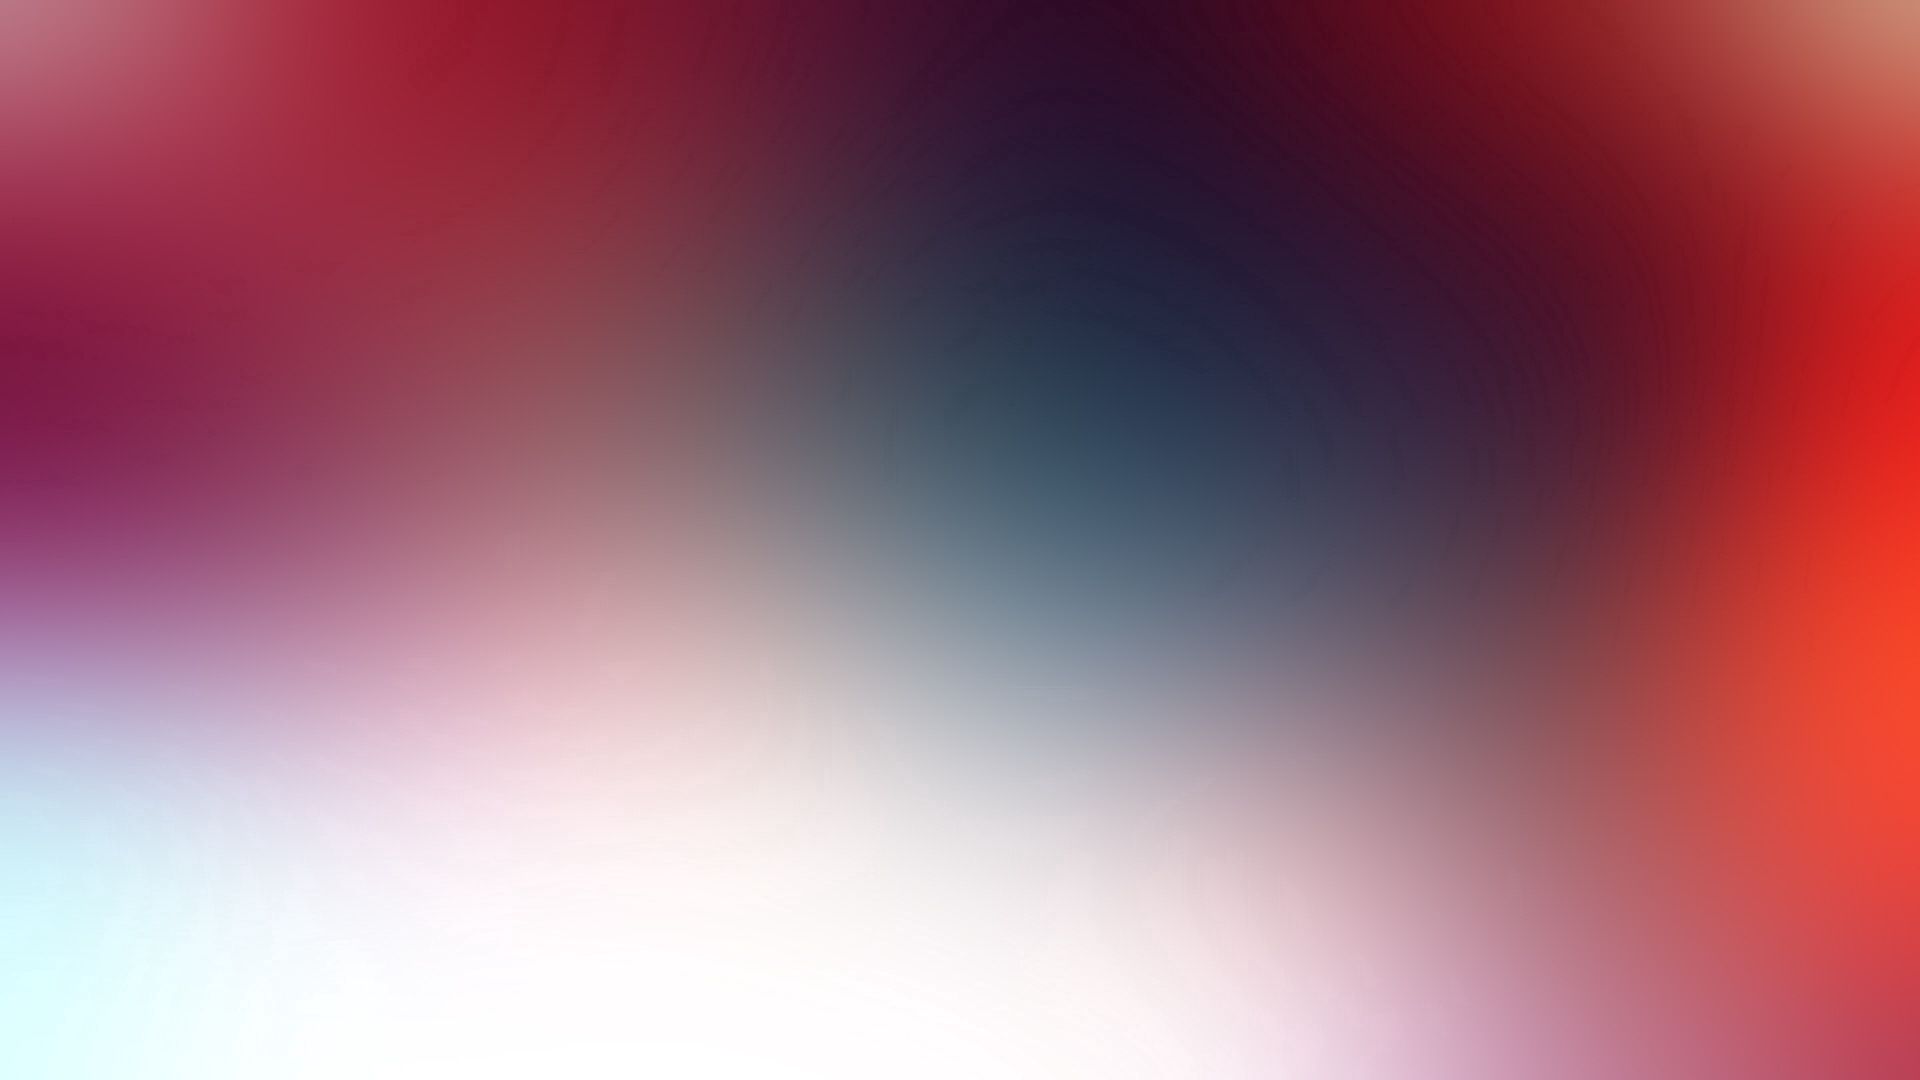 red, grey, spots, blue home screen for smartphone